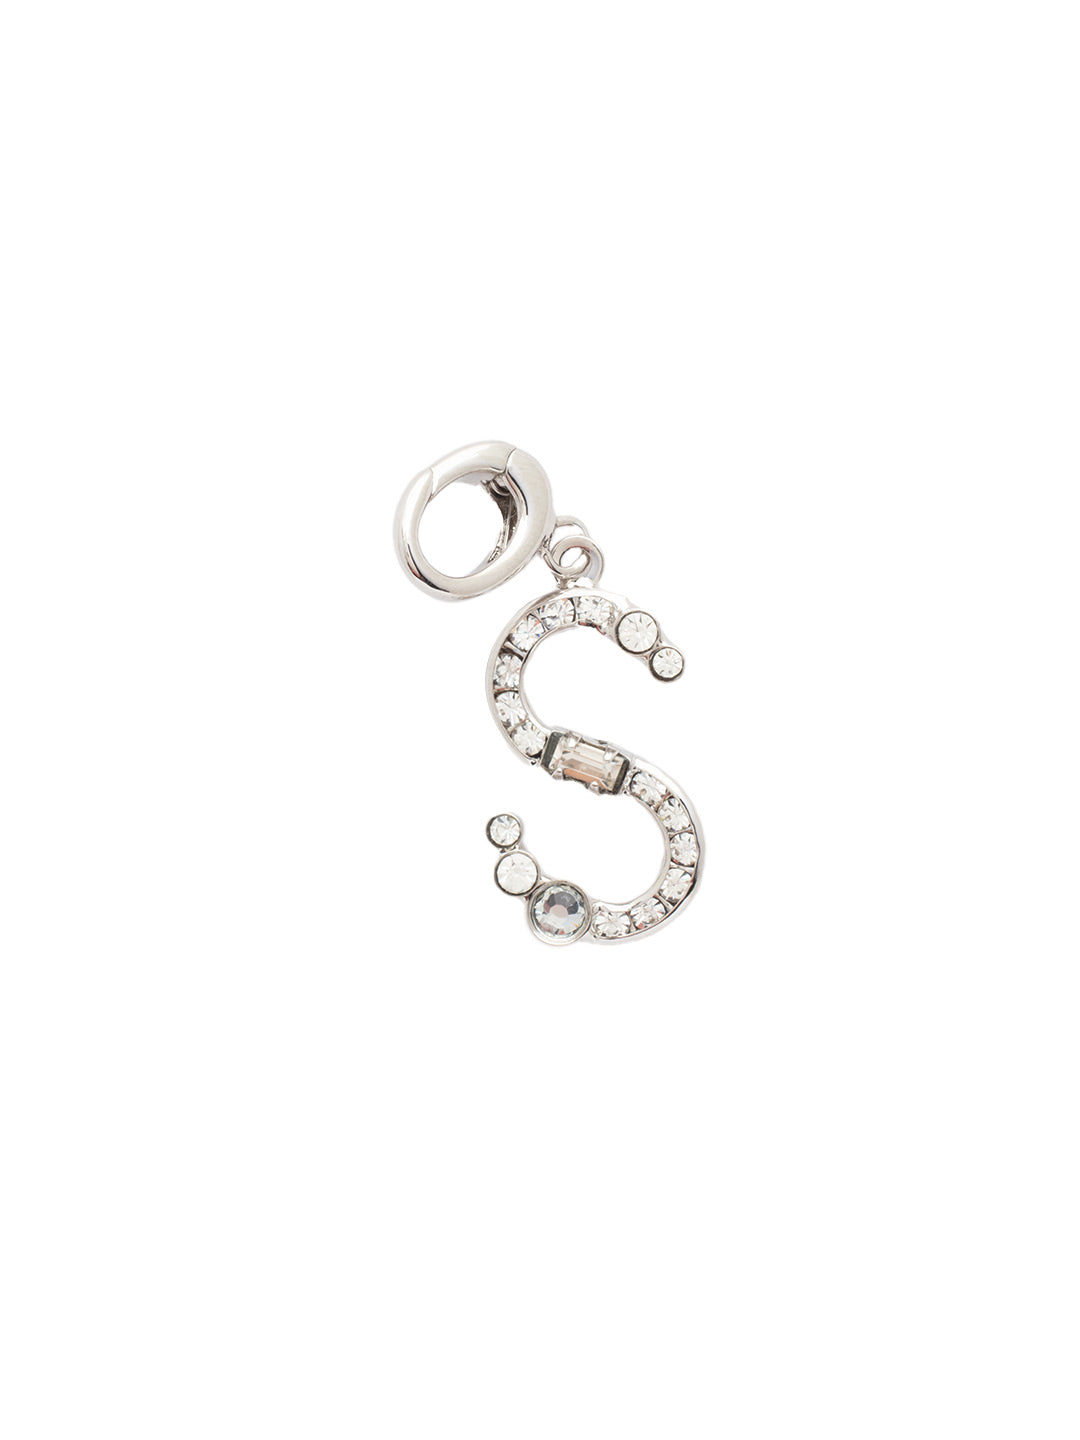 S Initial Charm - CEG20RHCRY - <p>The Initial Charm features a metal monogram letter embellished with an assortment of crystals and secured with an O clasp to easily add and take off different chains. From Sorrelli's Crystal collection in our Palladium Silver-tone finish.</p>